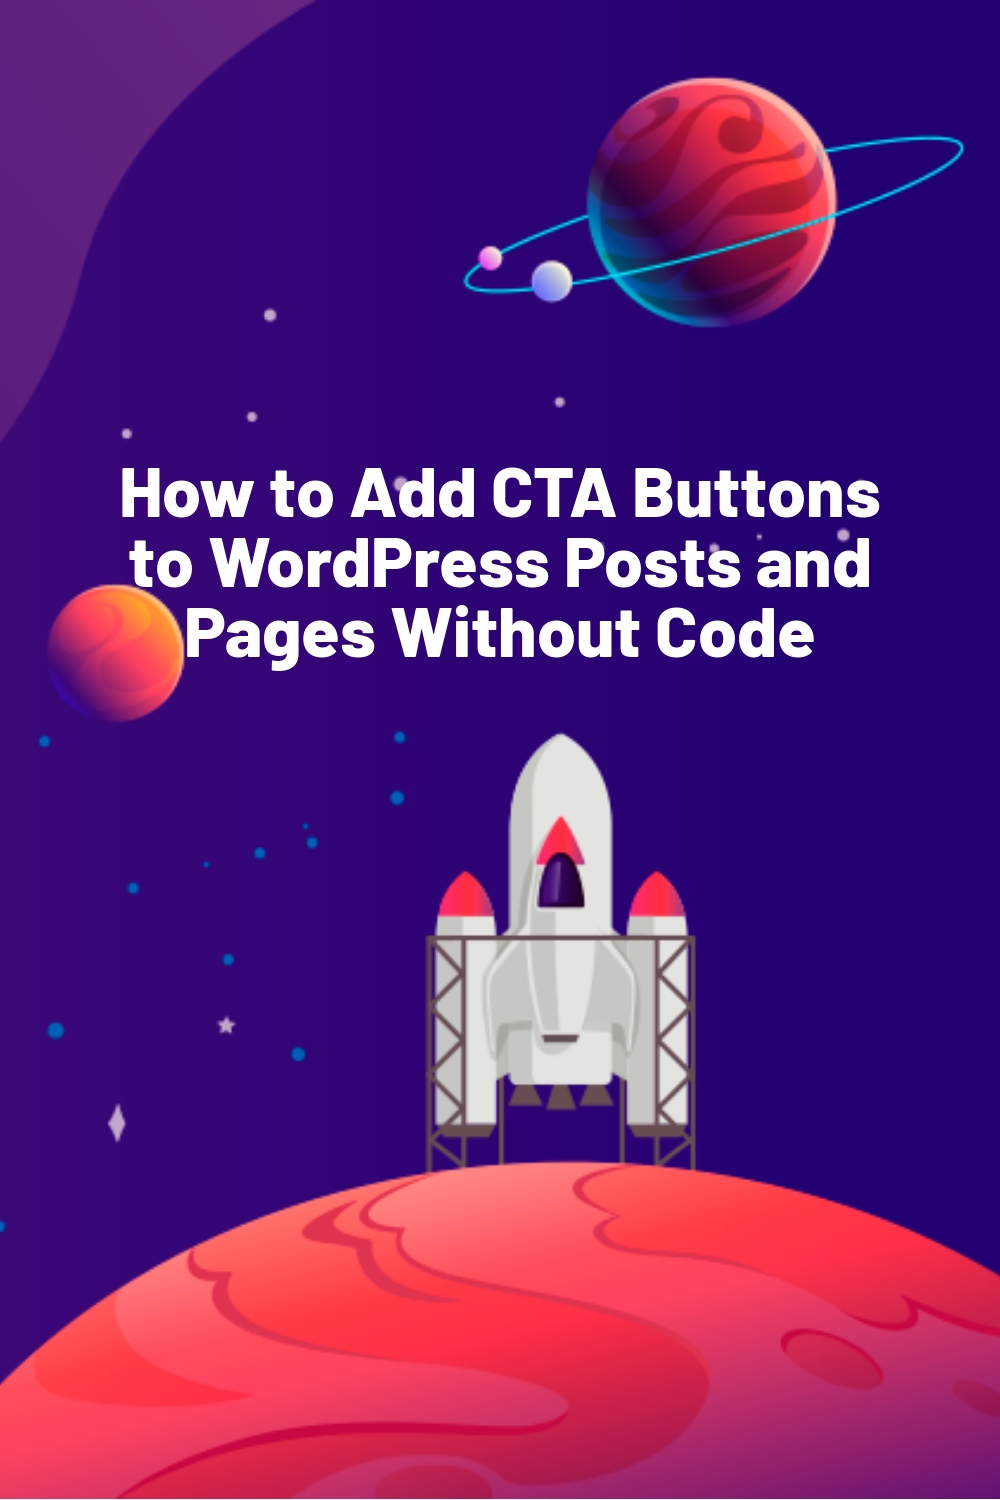 How to Add CTA Buttons to WordPress Posts and Pages Without Code